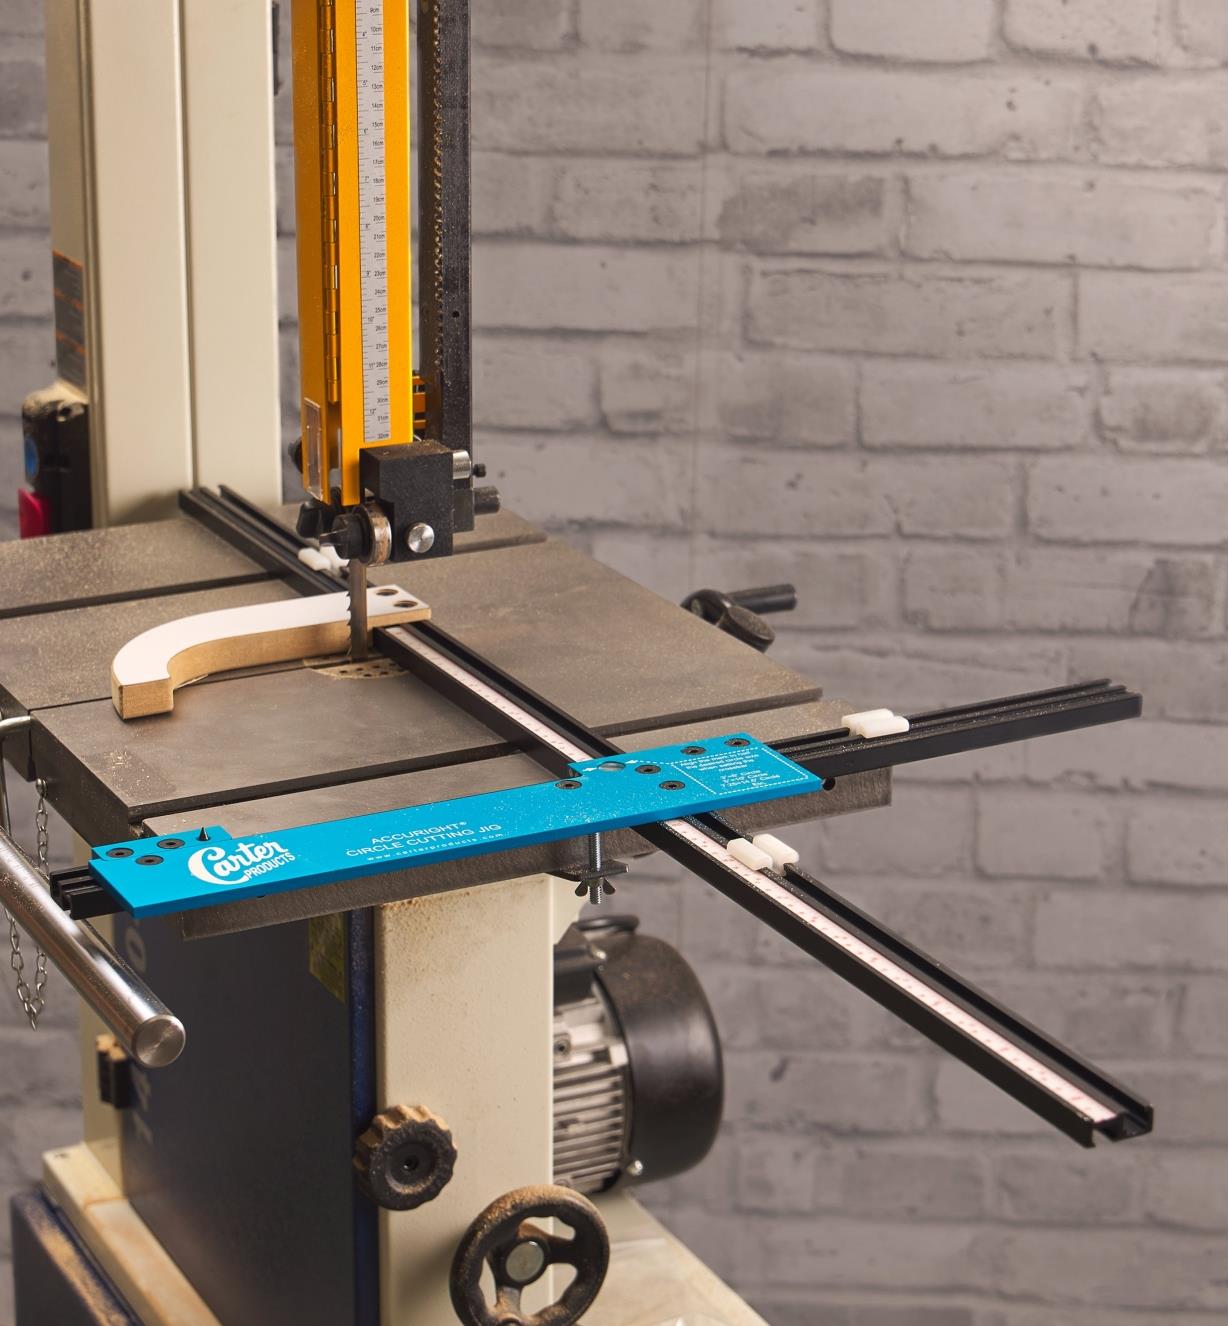 A circle-cutting jig and support connected to a bandsaw